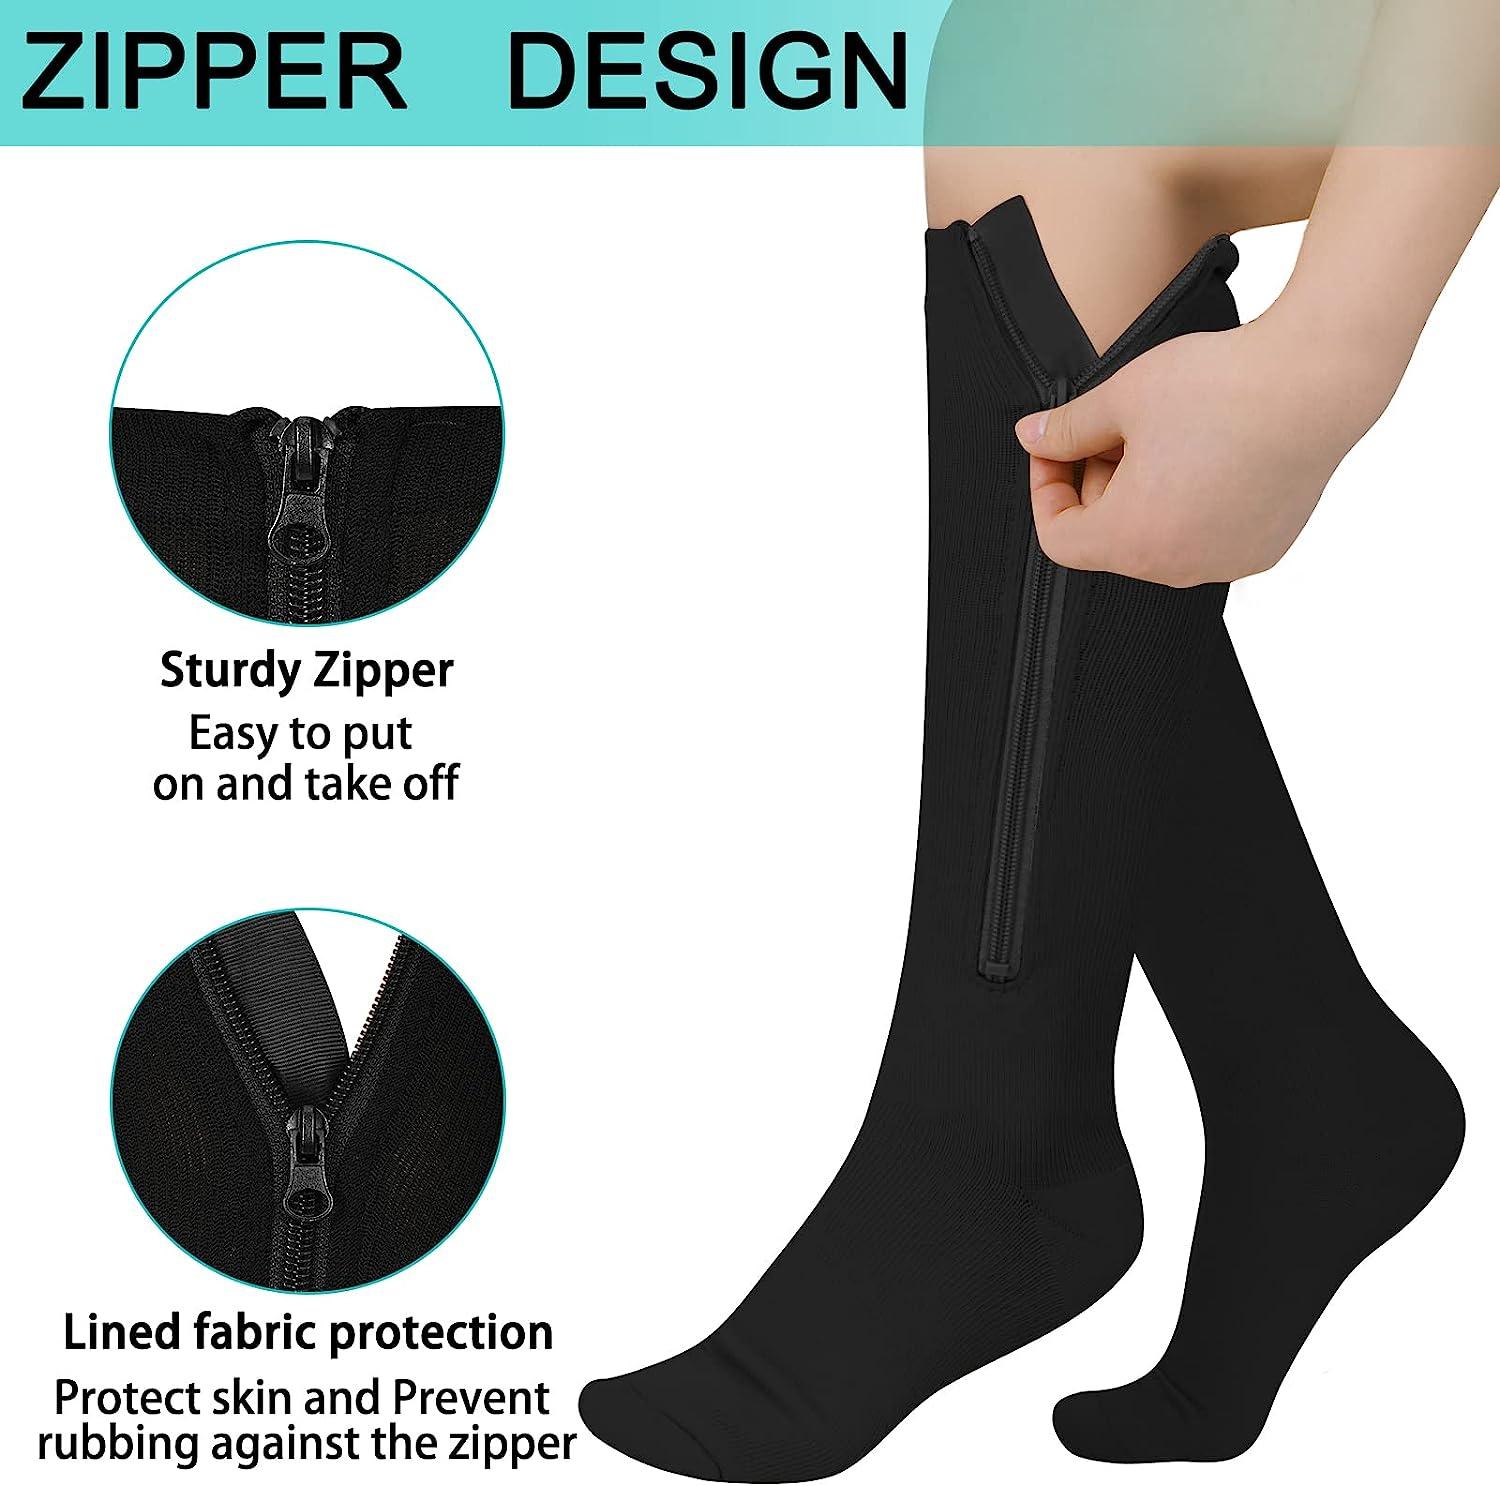 2 Pairs Zipper Compression Socks, 15-20 mmHg Closed Toe Compression  Stocking with Zipper for Women and Men Multicolor Small-Medium